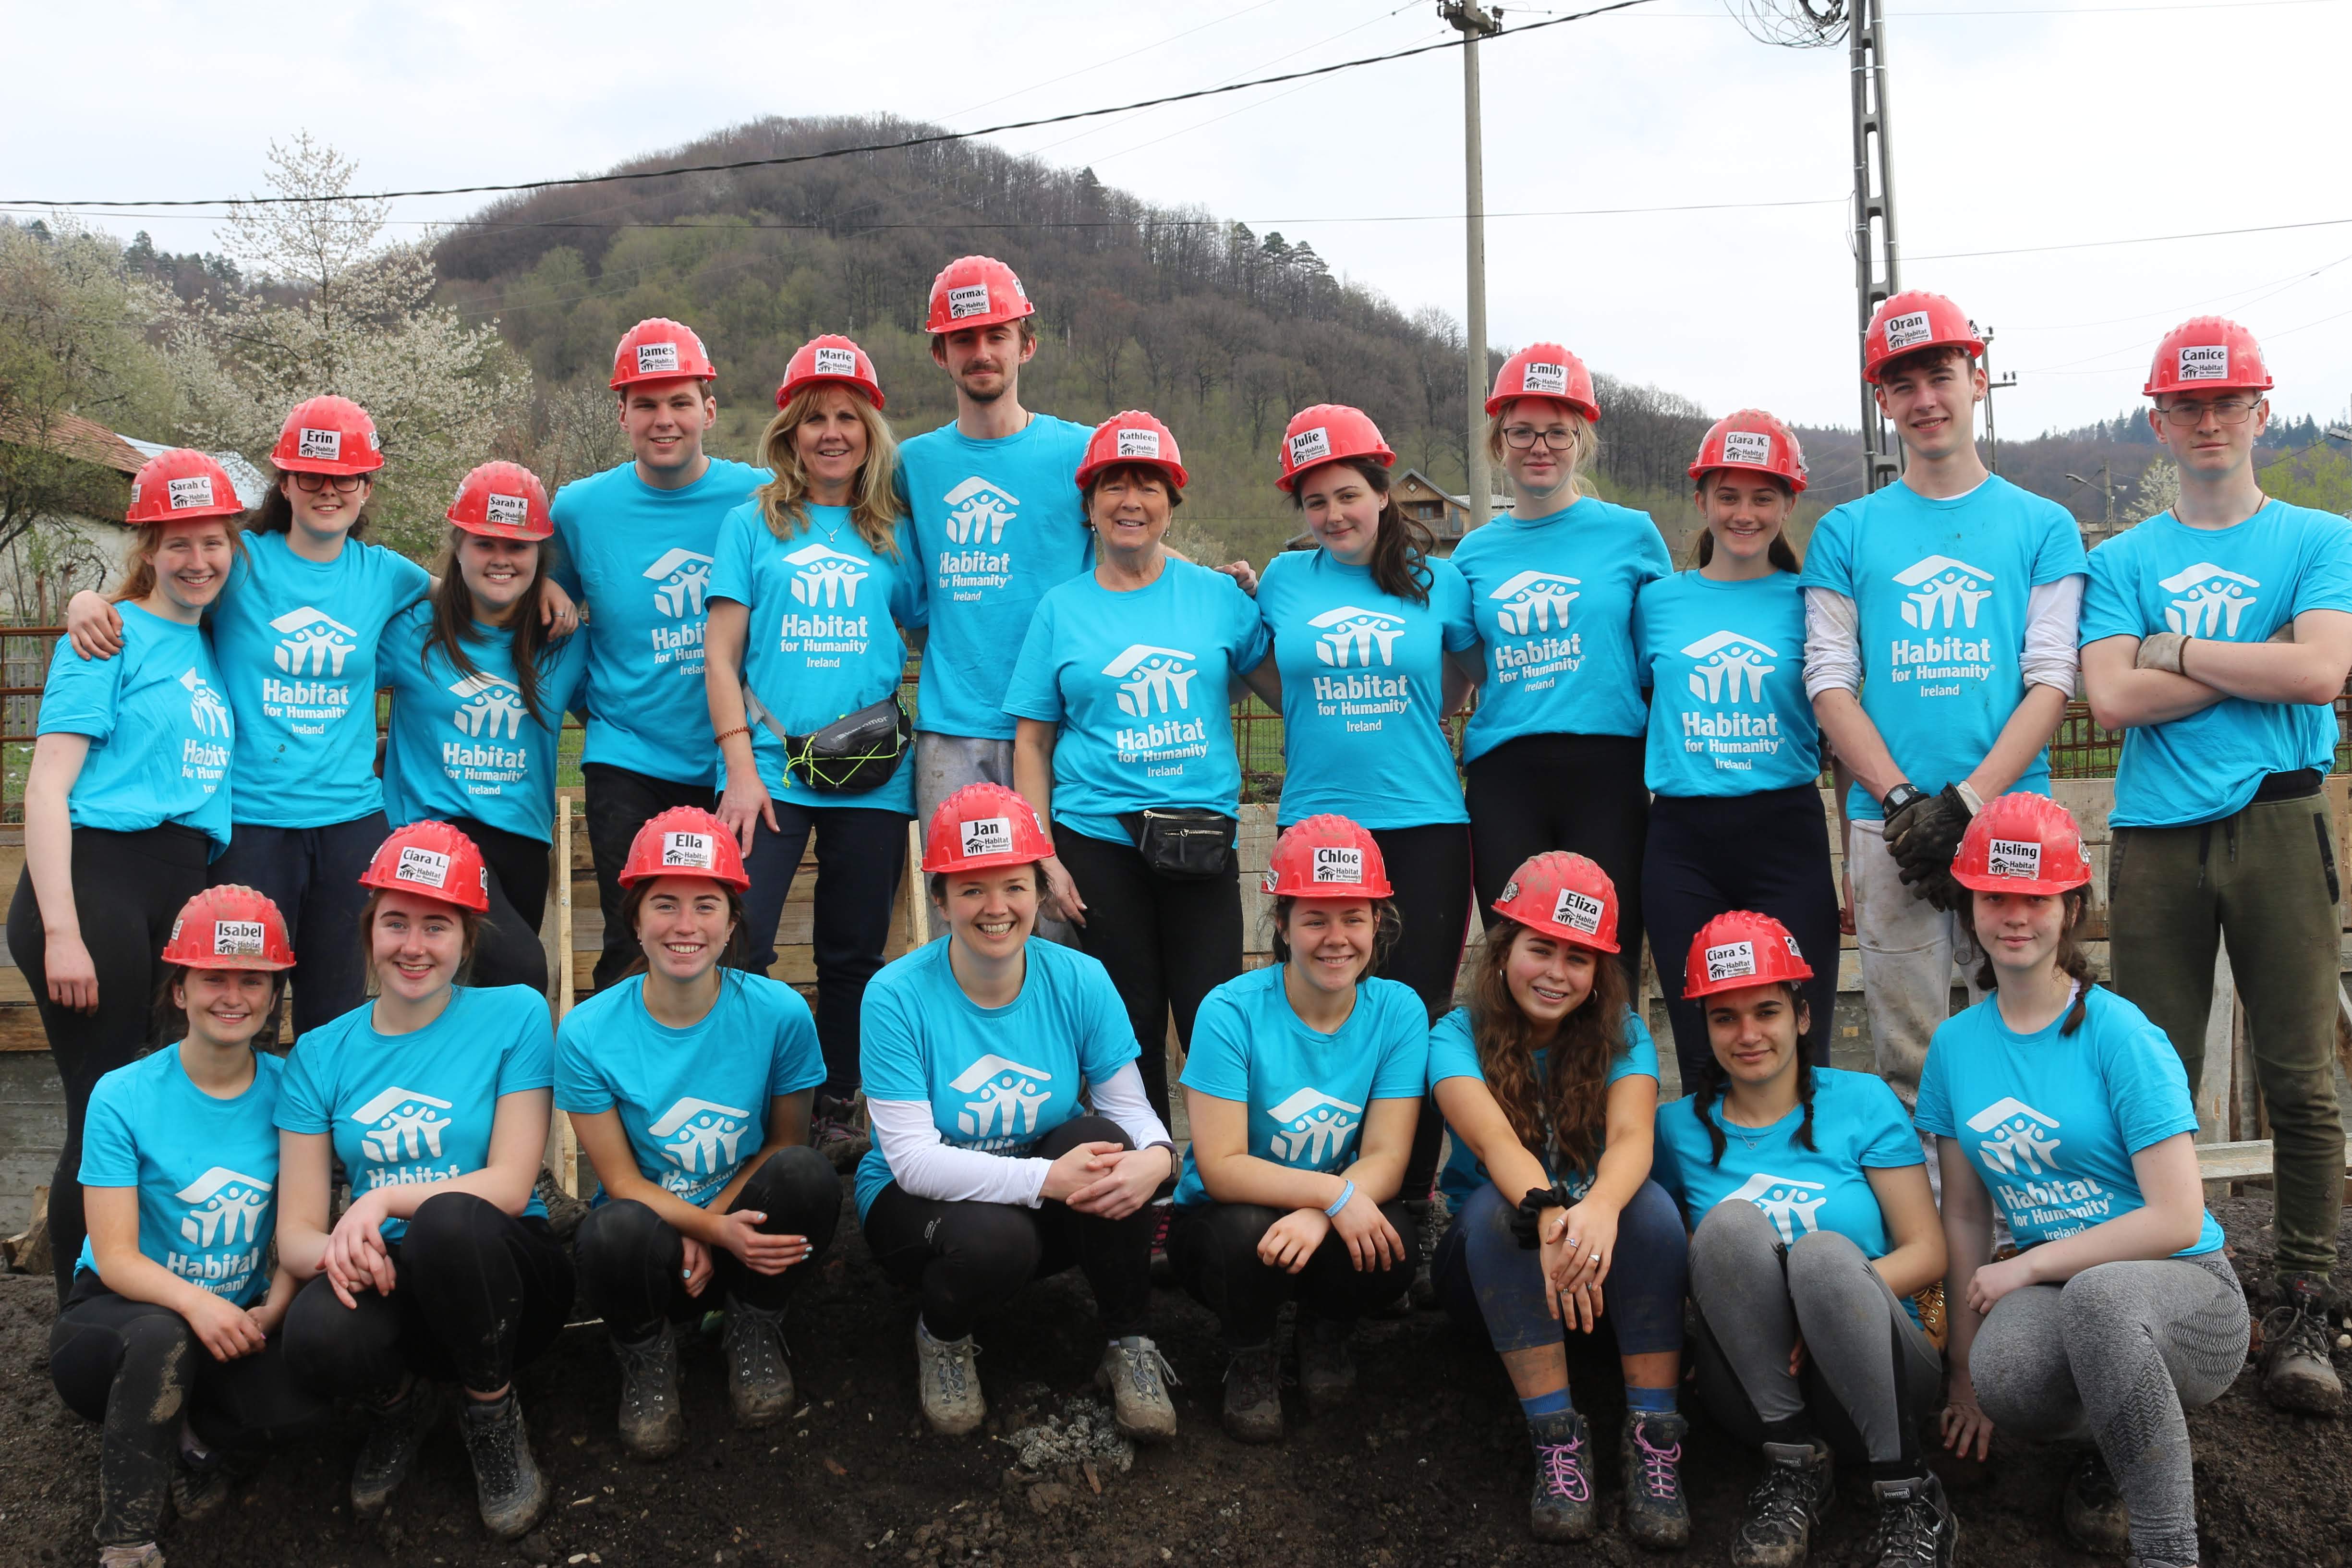 A group of volunteers, all in blue Habitat t-shirts and red hard hats, smile into the camera on sire in Romania